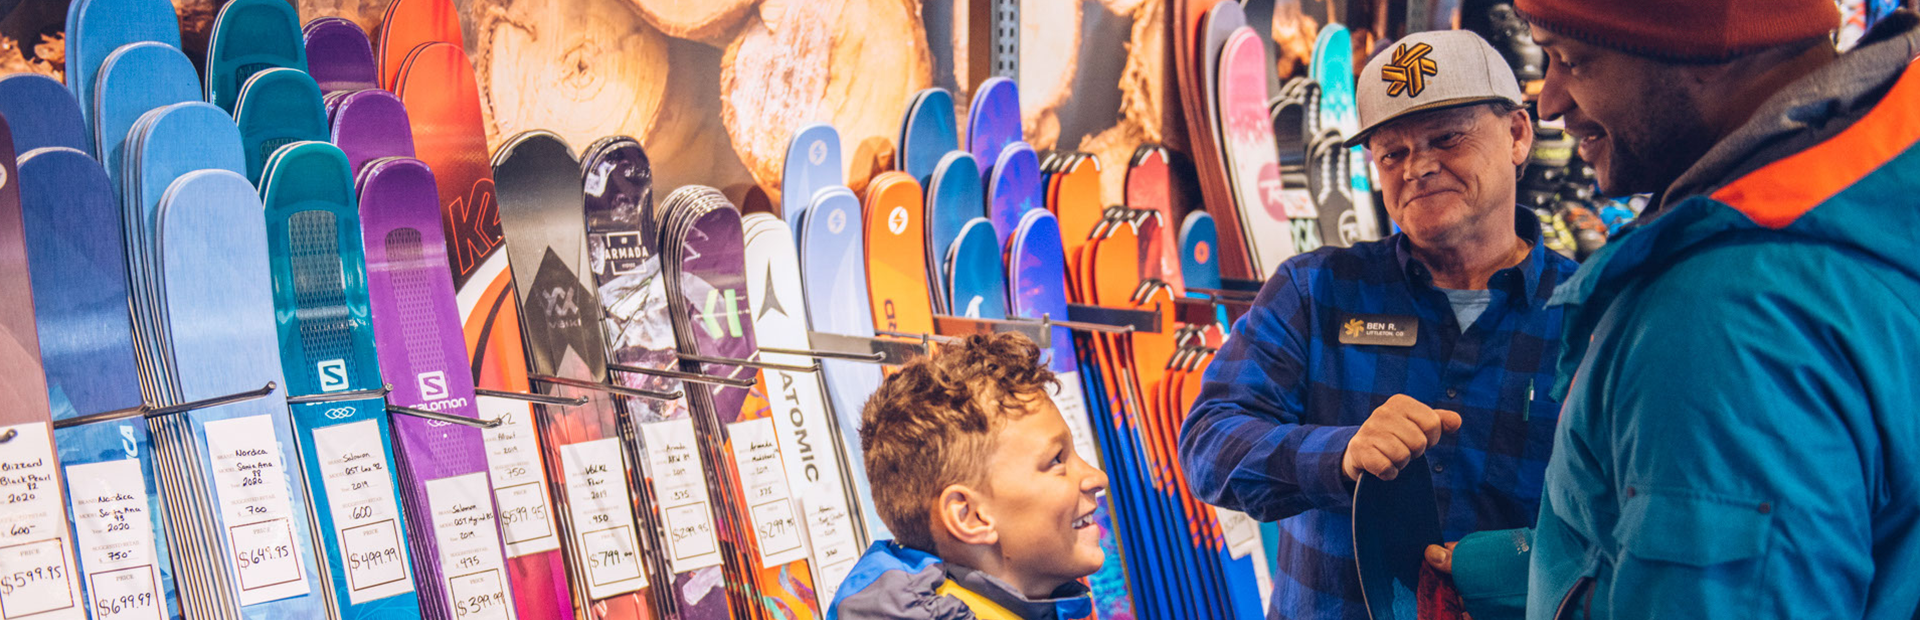 Man and child looking at snowboard with a ski shop employee with skis in the background